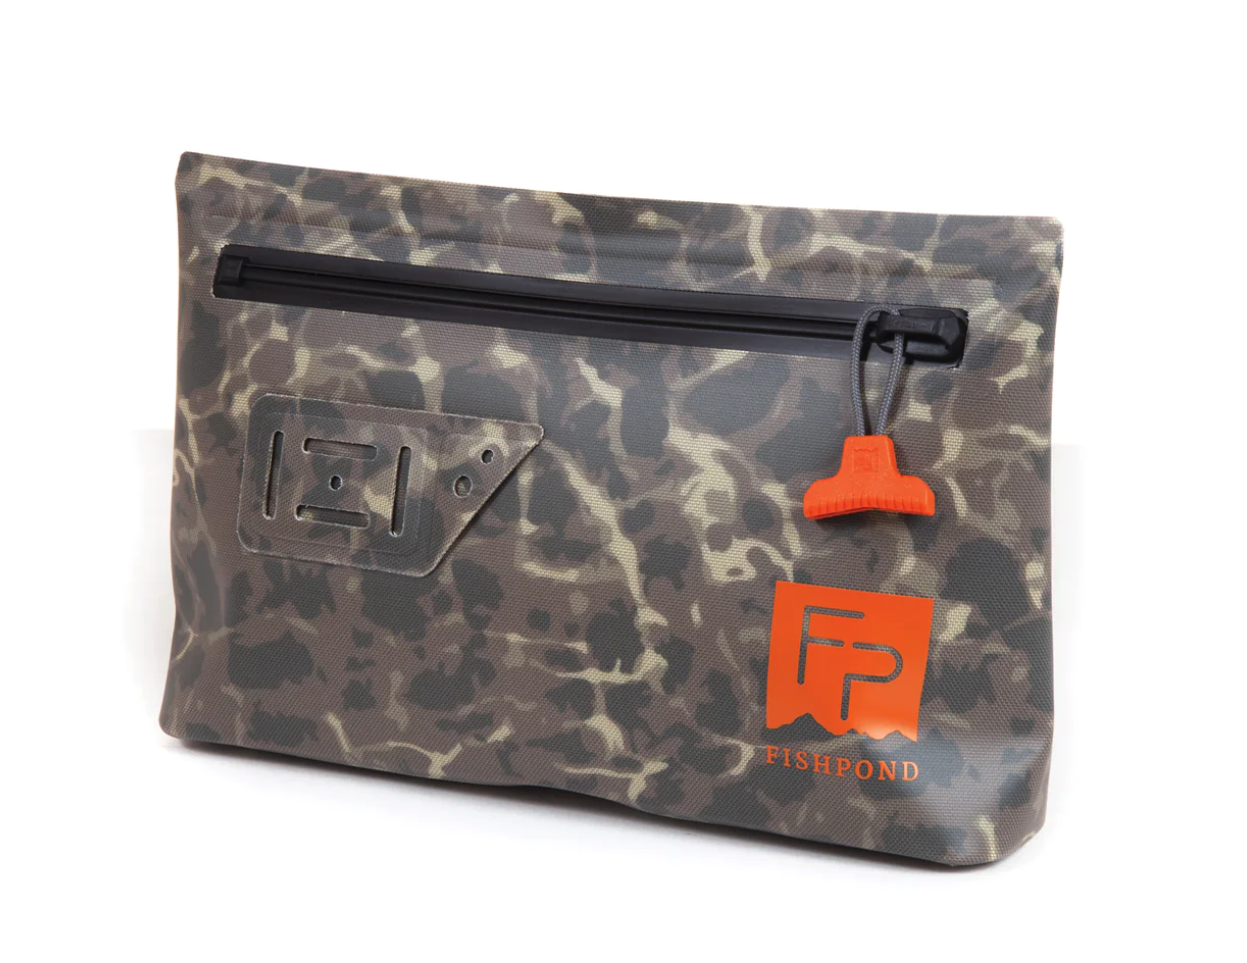 Fishpond Thunderhead Submersible Pouch Eco, Buy Fishpond Fly Fishing Gear  Online At The Fly Fishers